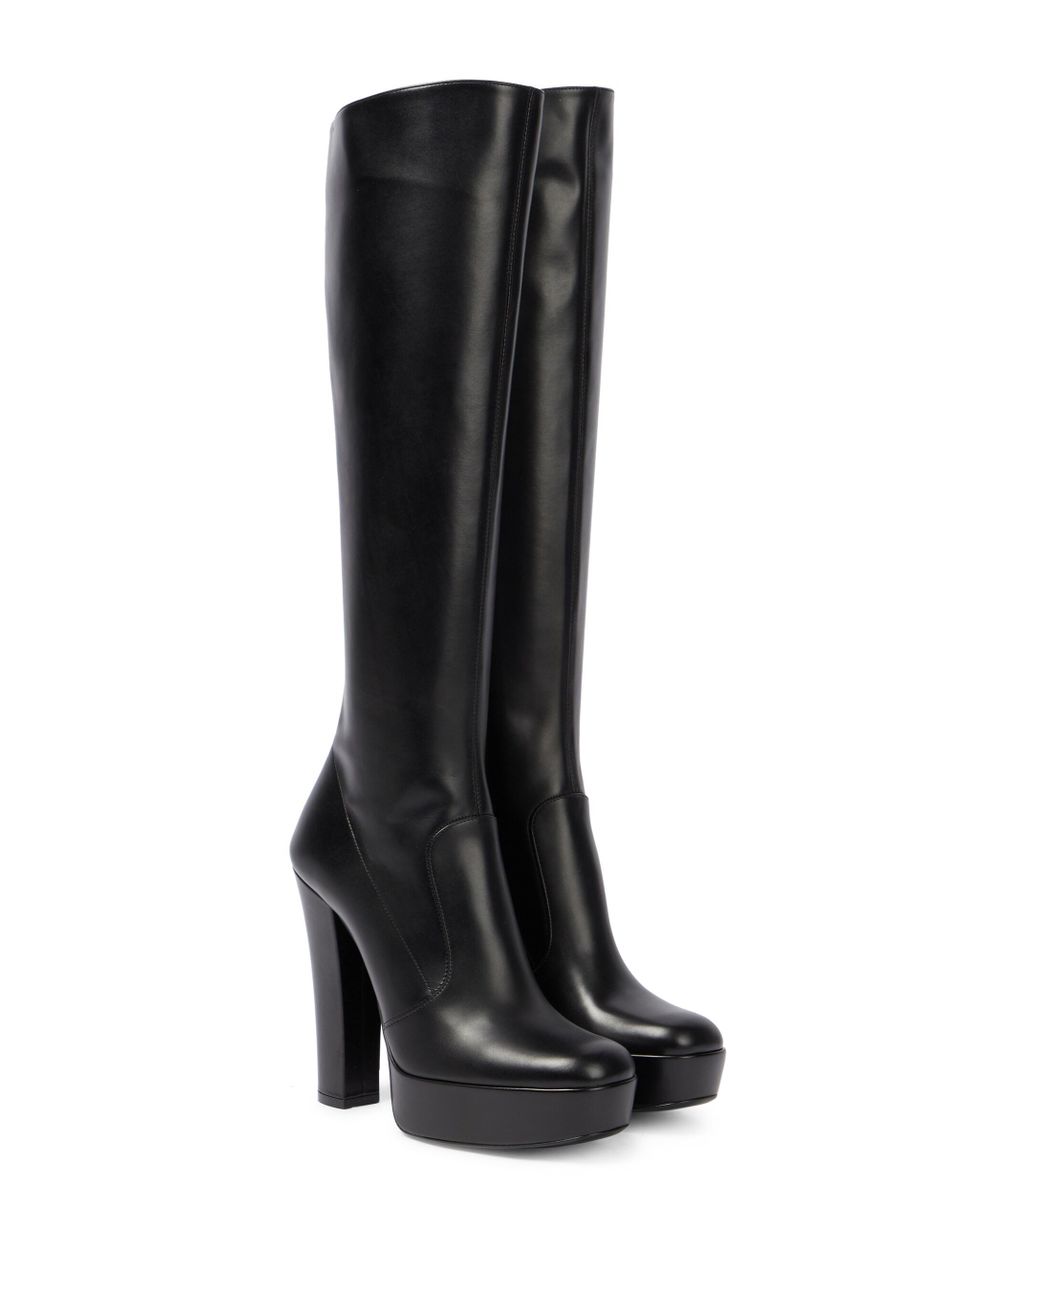 Saint Laurent Carel Patent Leather Knee-high Boots in Black | Lyst